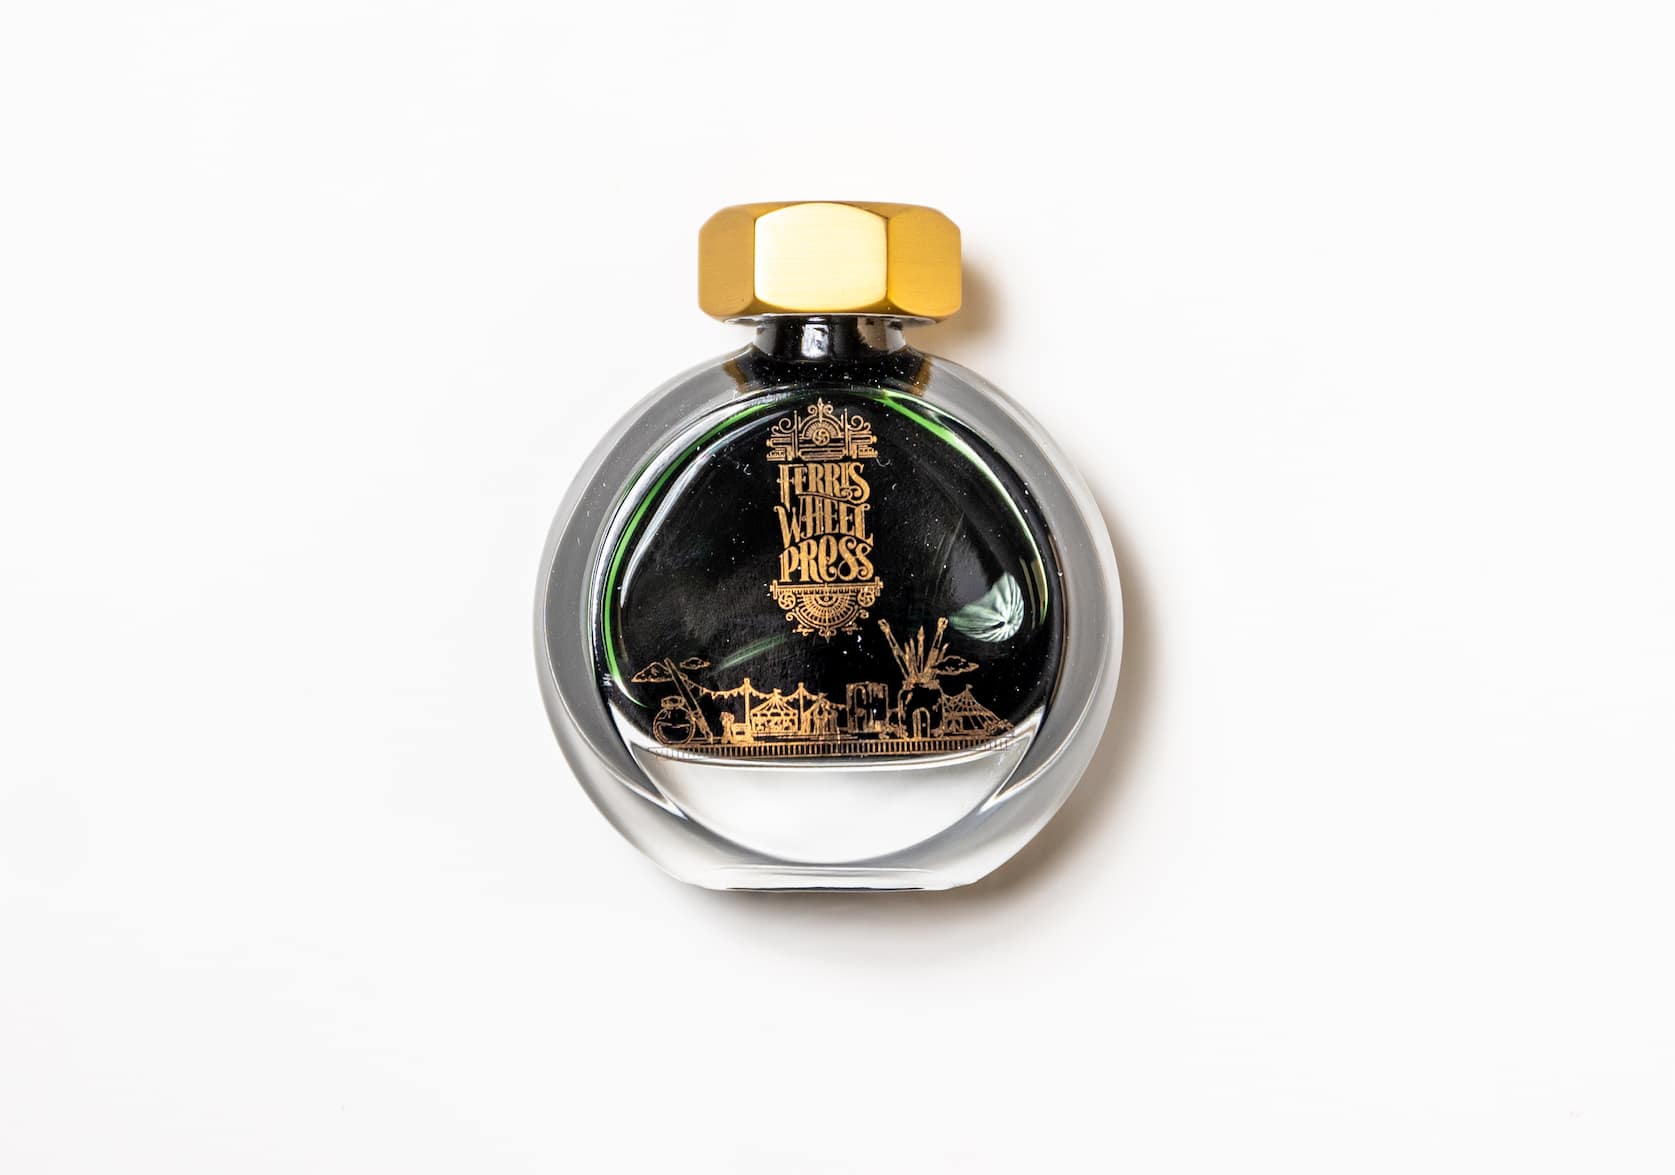 A round glass bottle of ink with a gold lid. On the bottle there is a small gold illustration featuring a merry-go-round and circus tent.